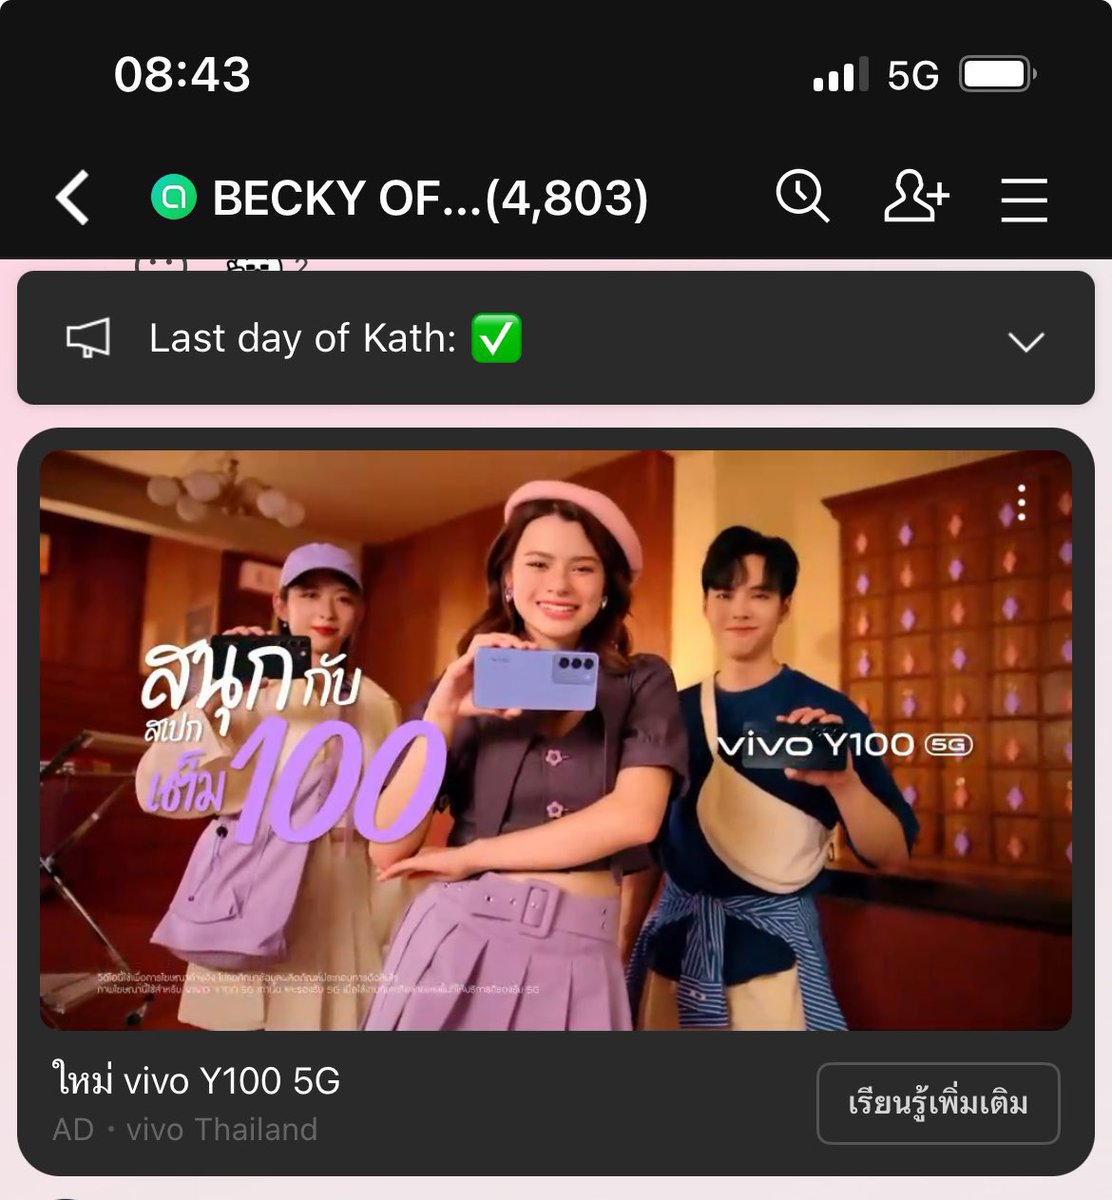 Becky’s Vivo Ad today at Line App 💕 #beckysangels